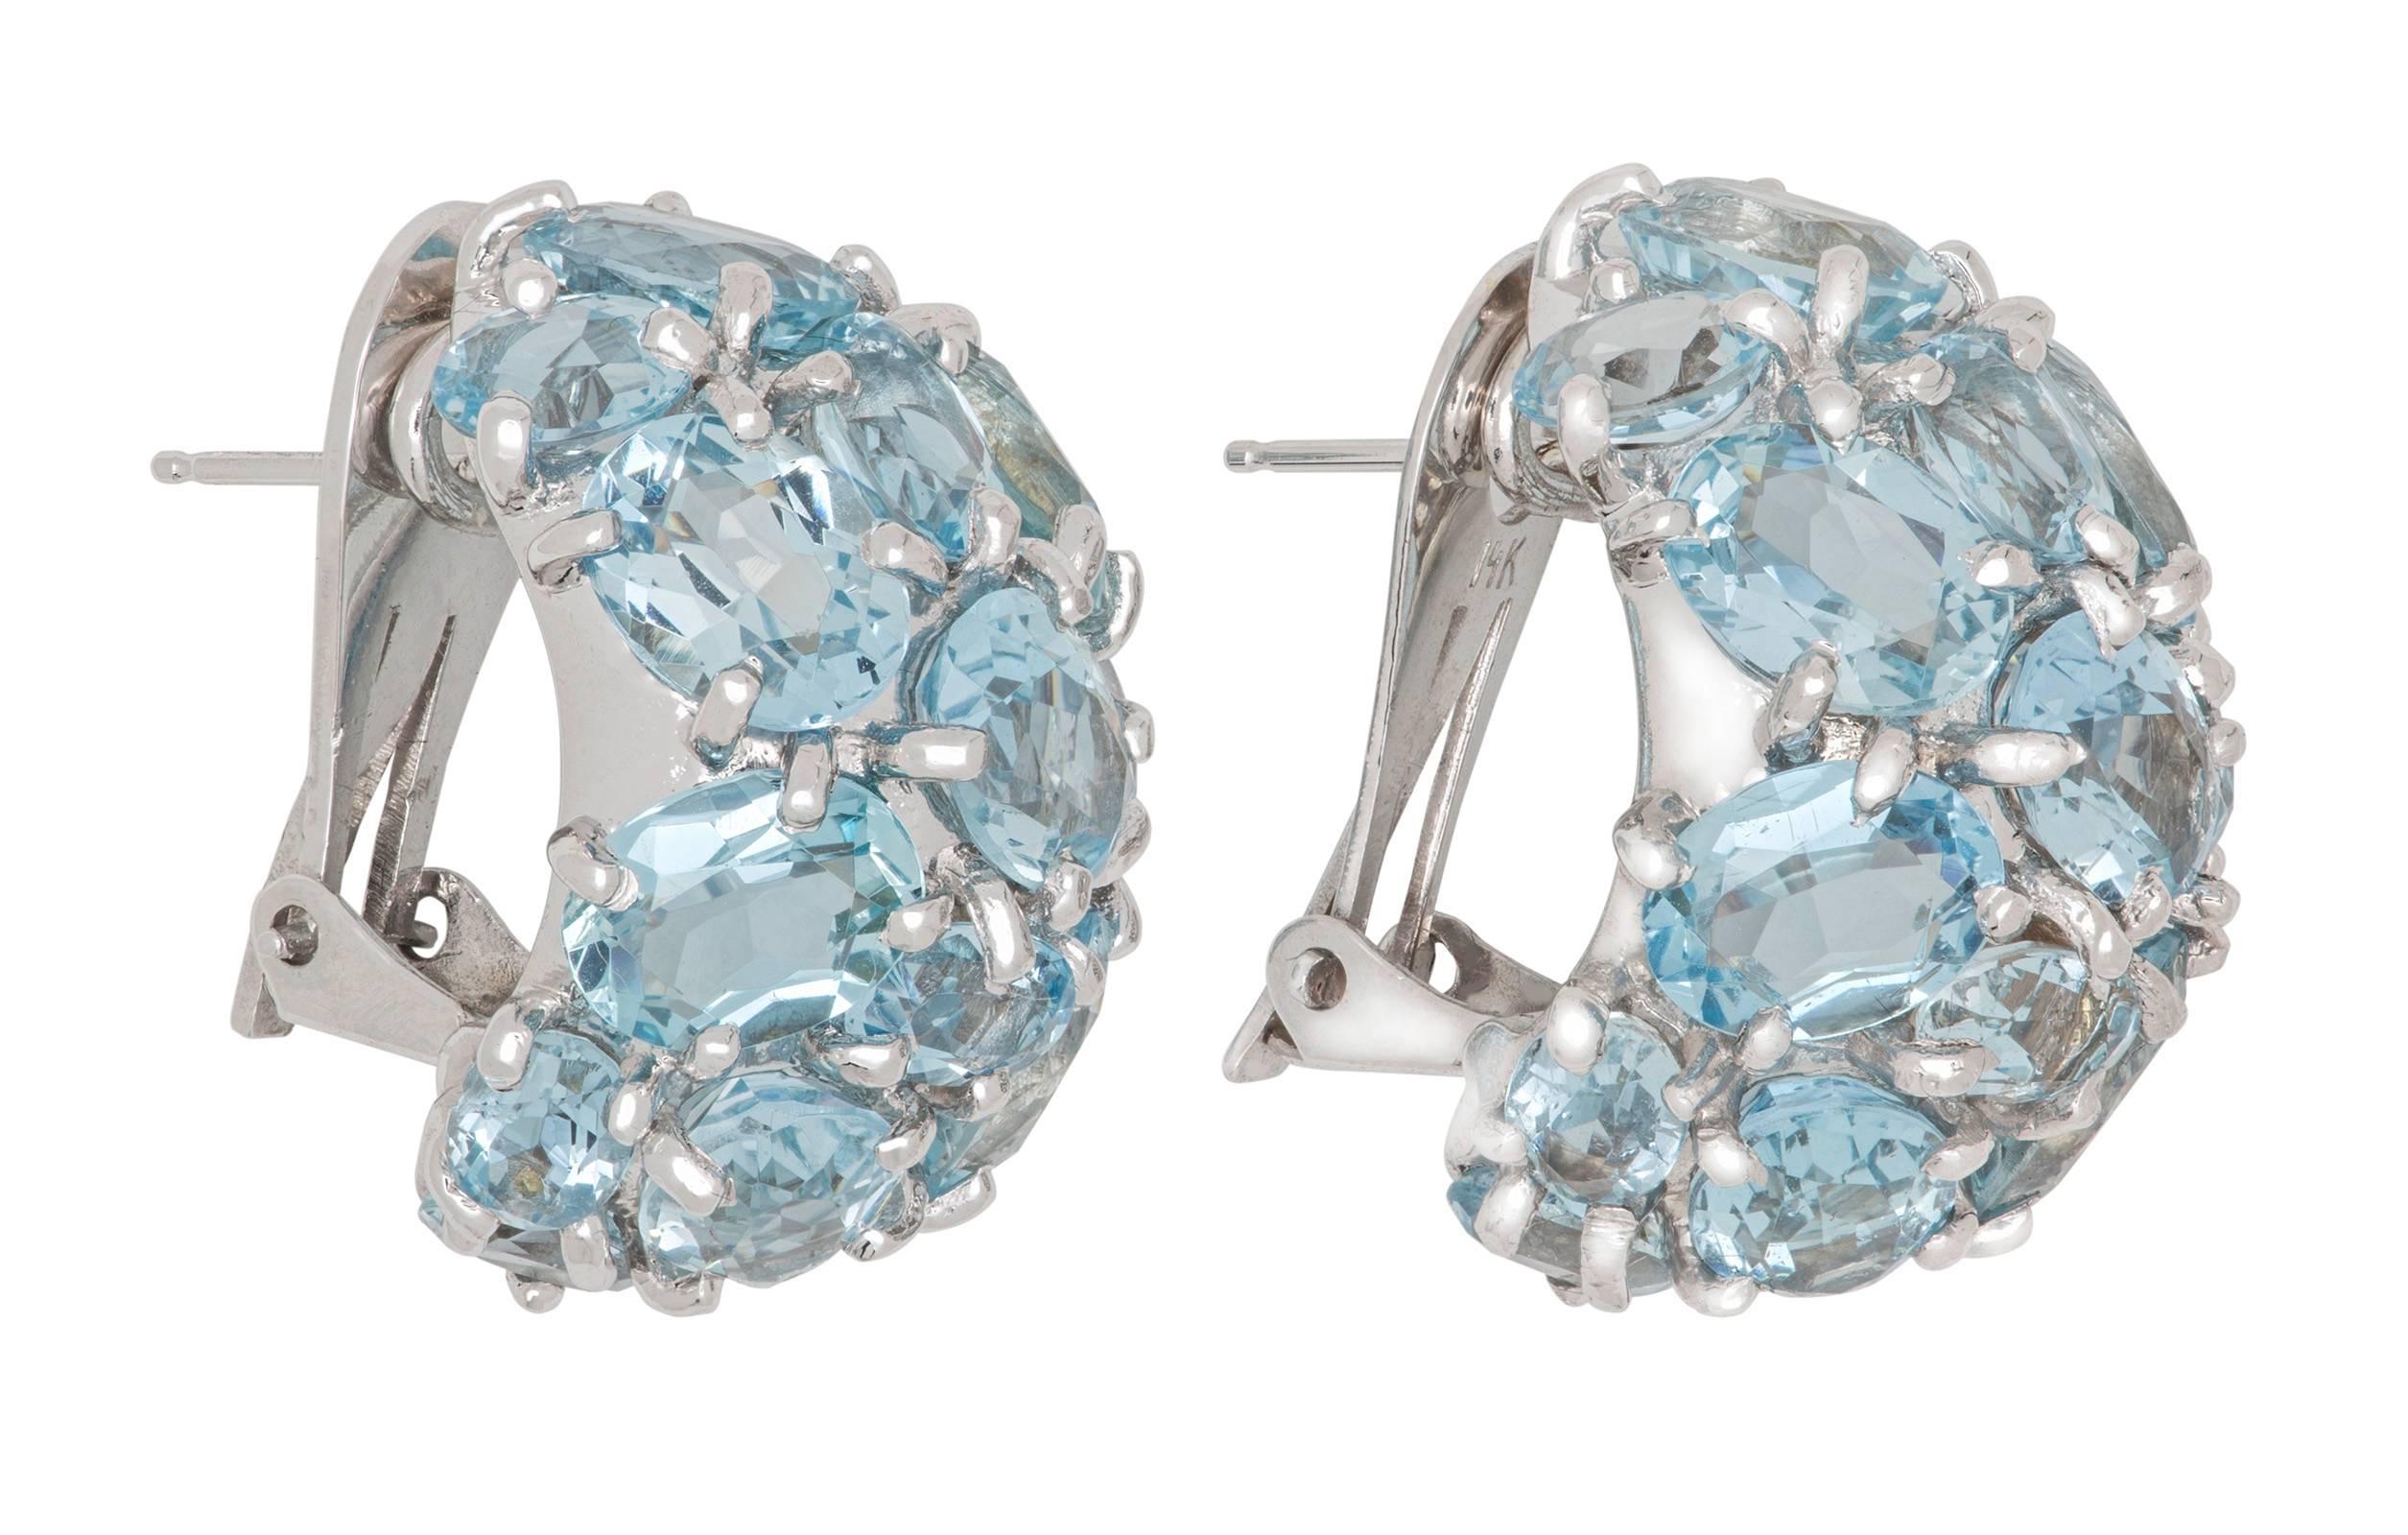 Fabulous dazzling dome shape Aquamarines 14k gold ear clips.
Sparkling blue enhanced by 14k gold Rodium plated.
Great size clips to adorn your face!  approximately 35ct  of aquamarine.
Size .75 X 1.0 X .5 d
Total weight 20.7g

